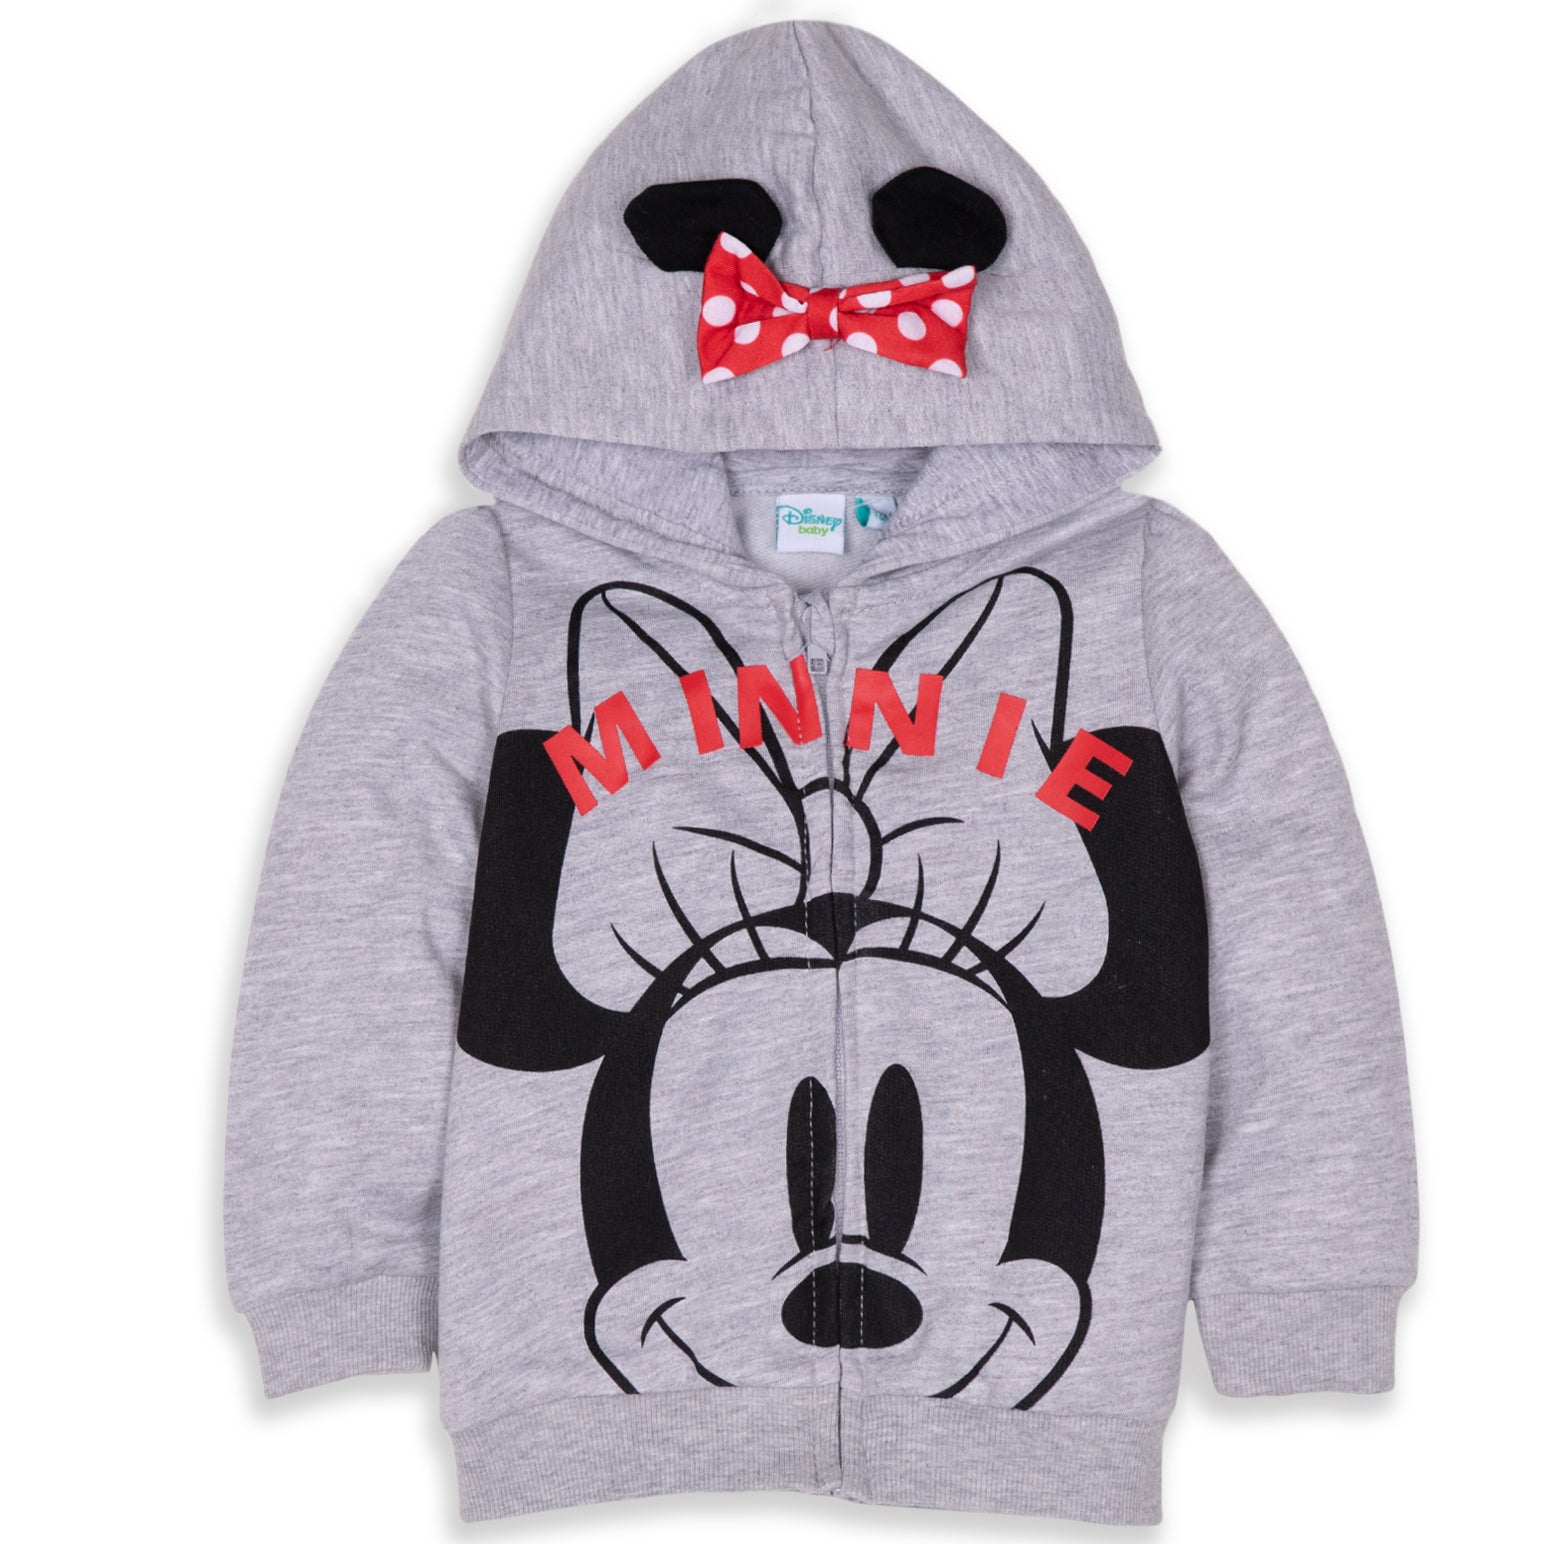 minnie mouse jumper adults